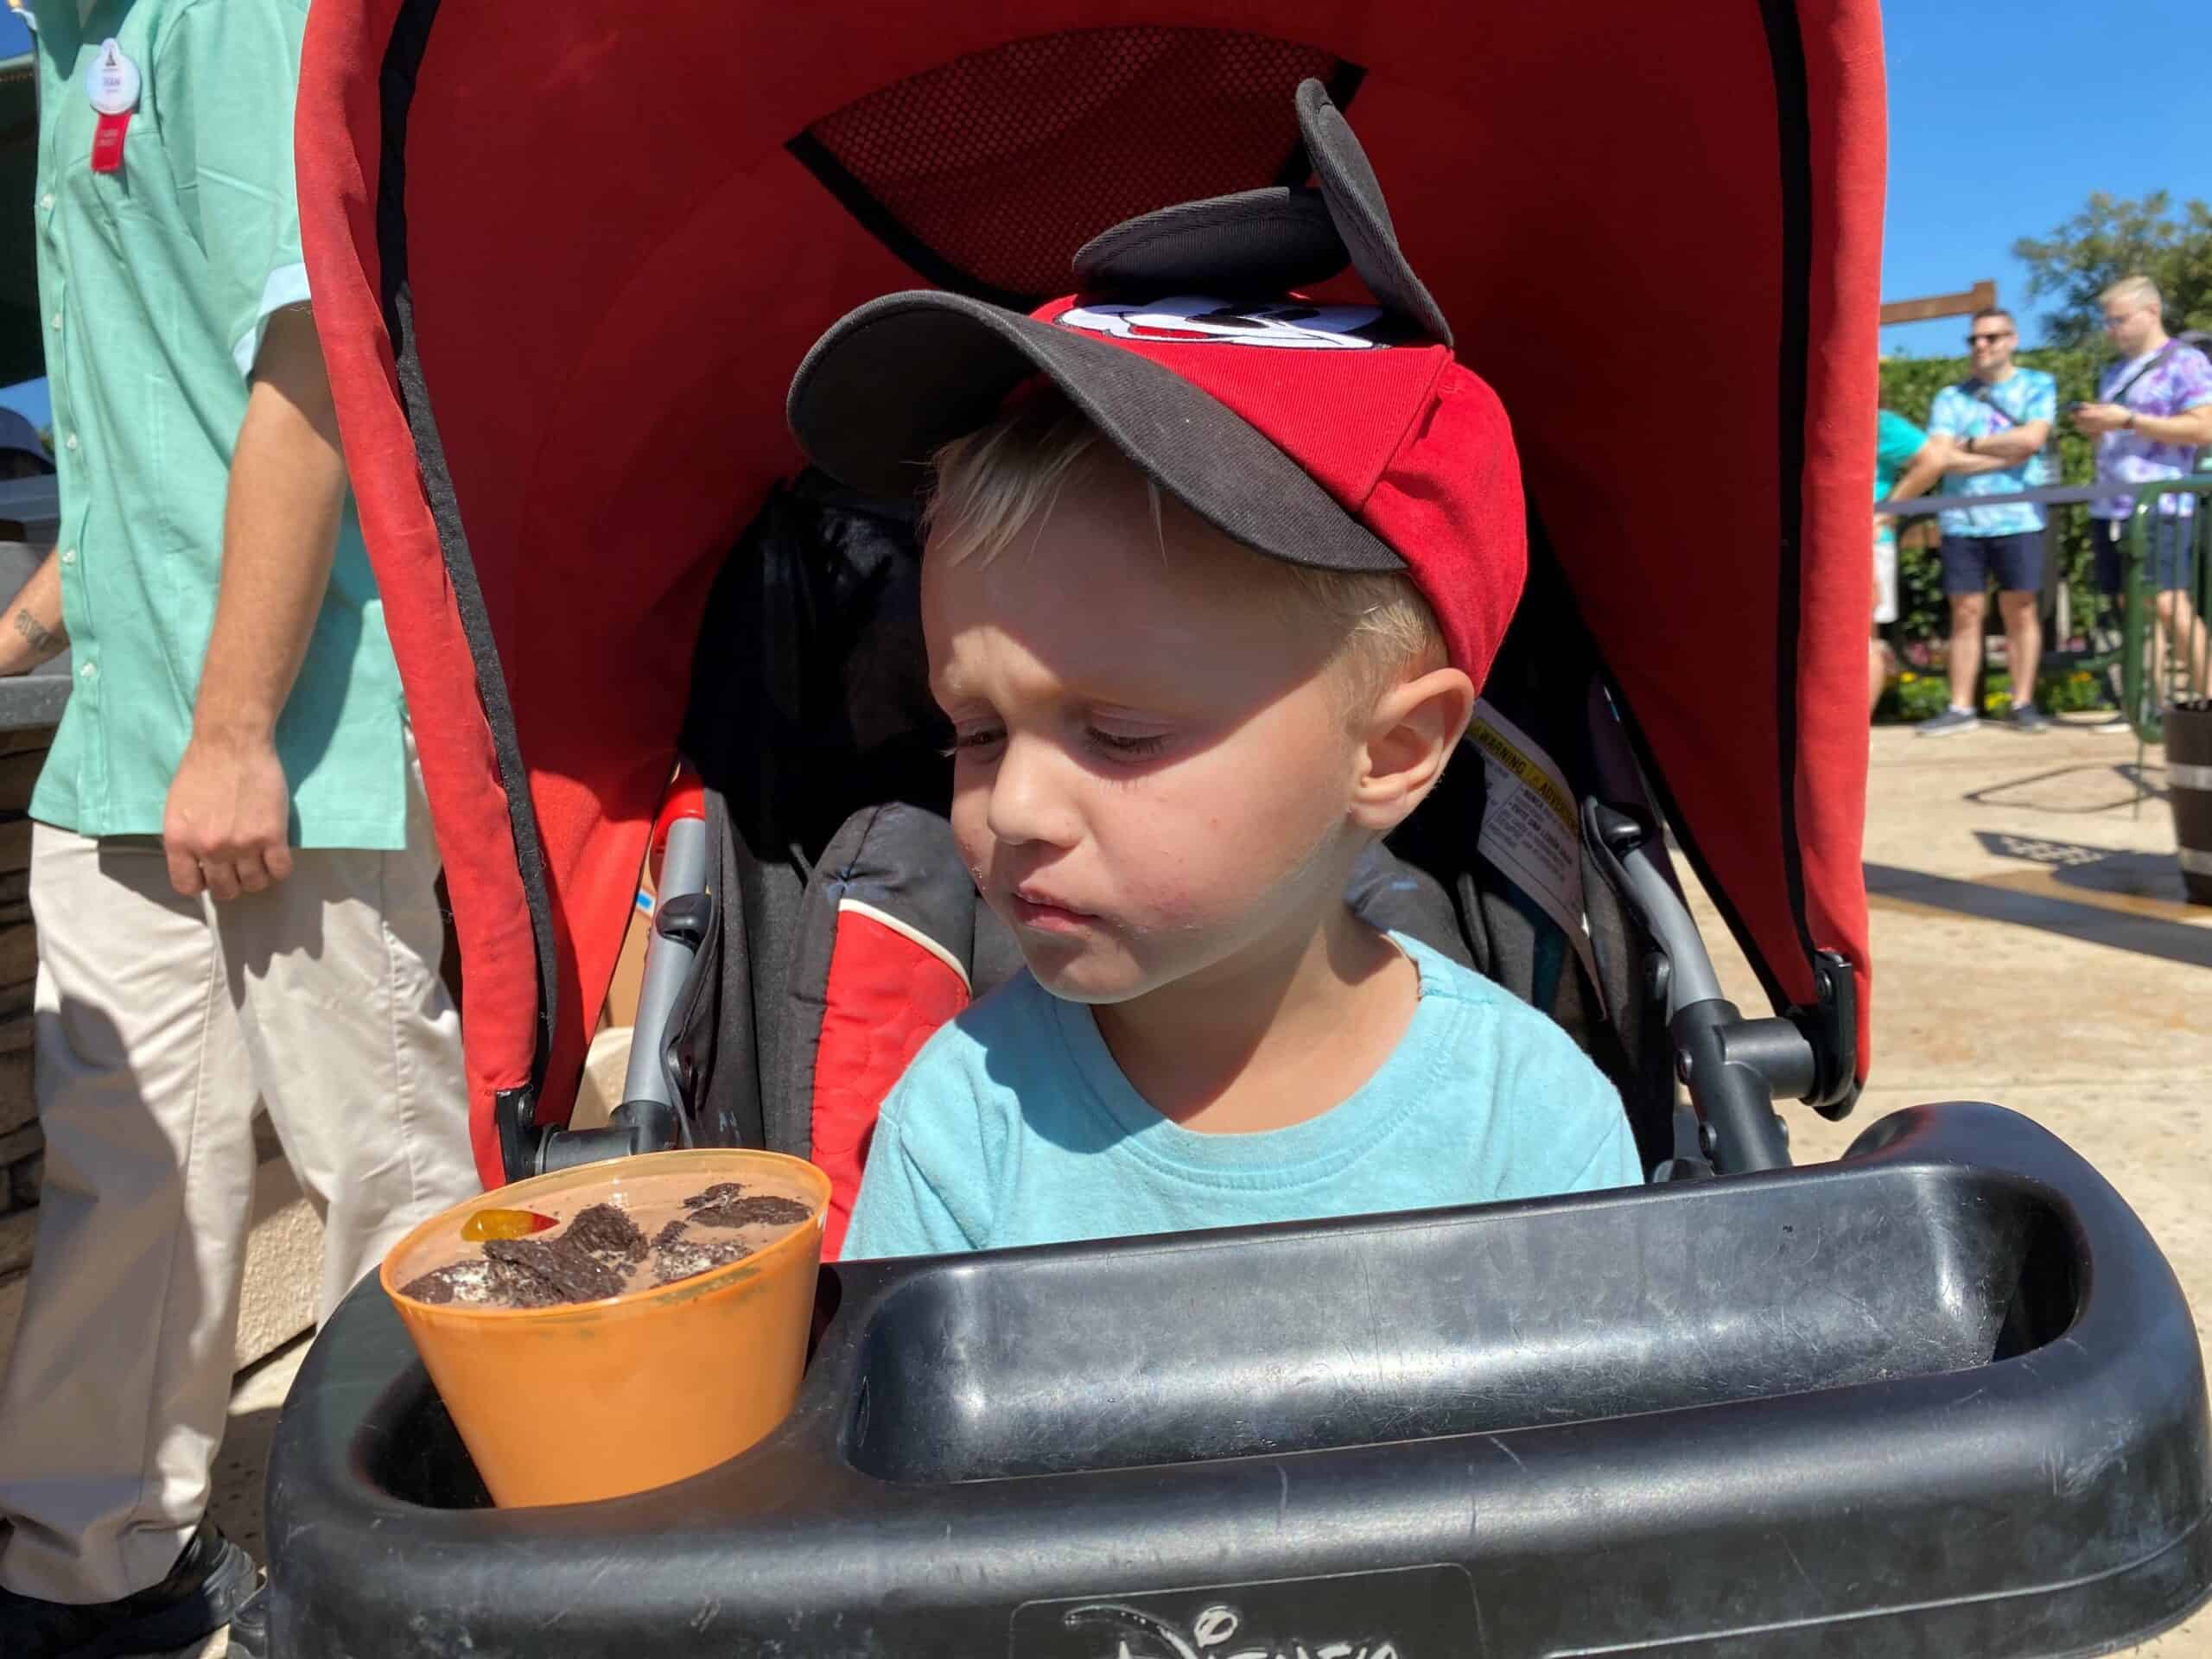 A four year old boy looks suspiciously at Cookie Butter Worms and Dirt drink - Epcot Flower and Garden 2022